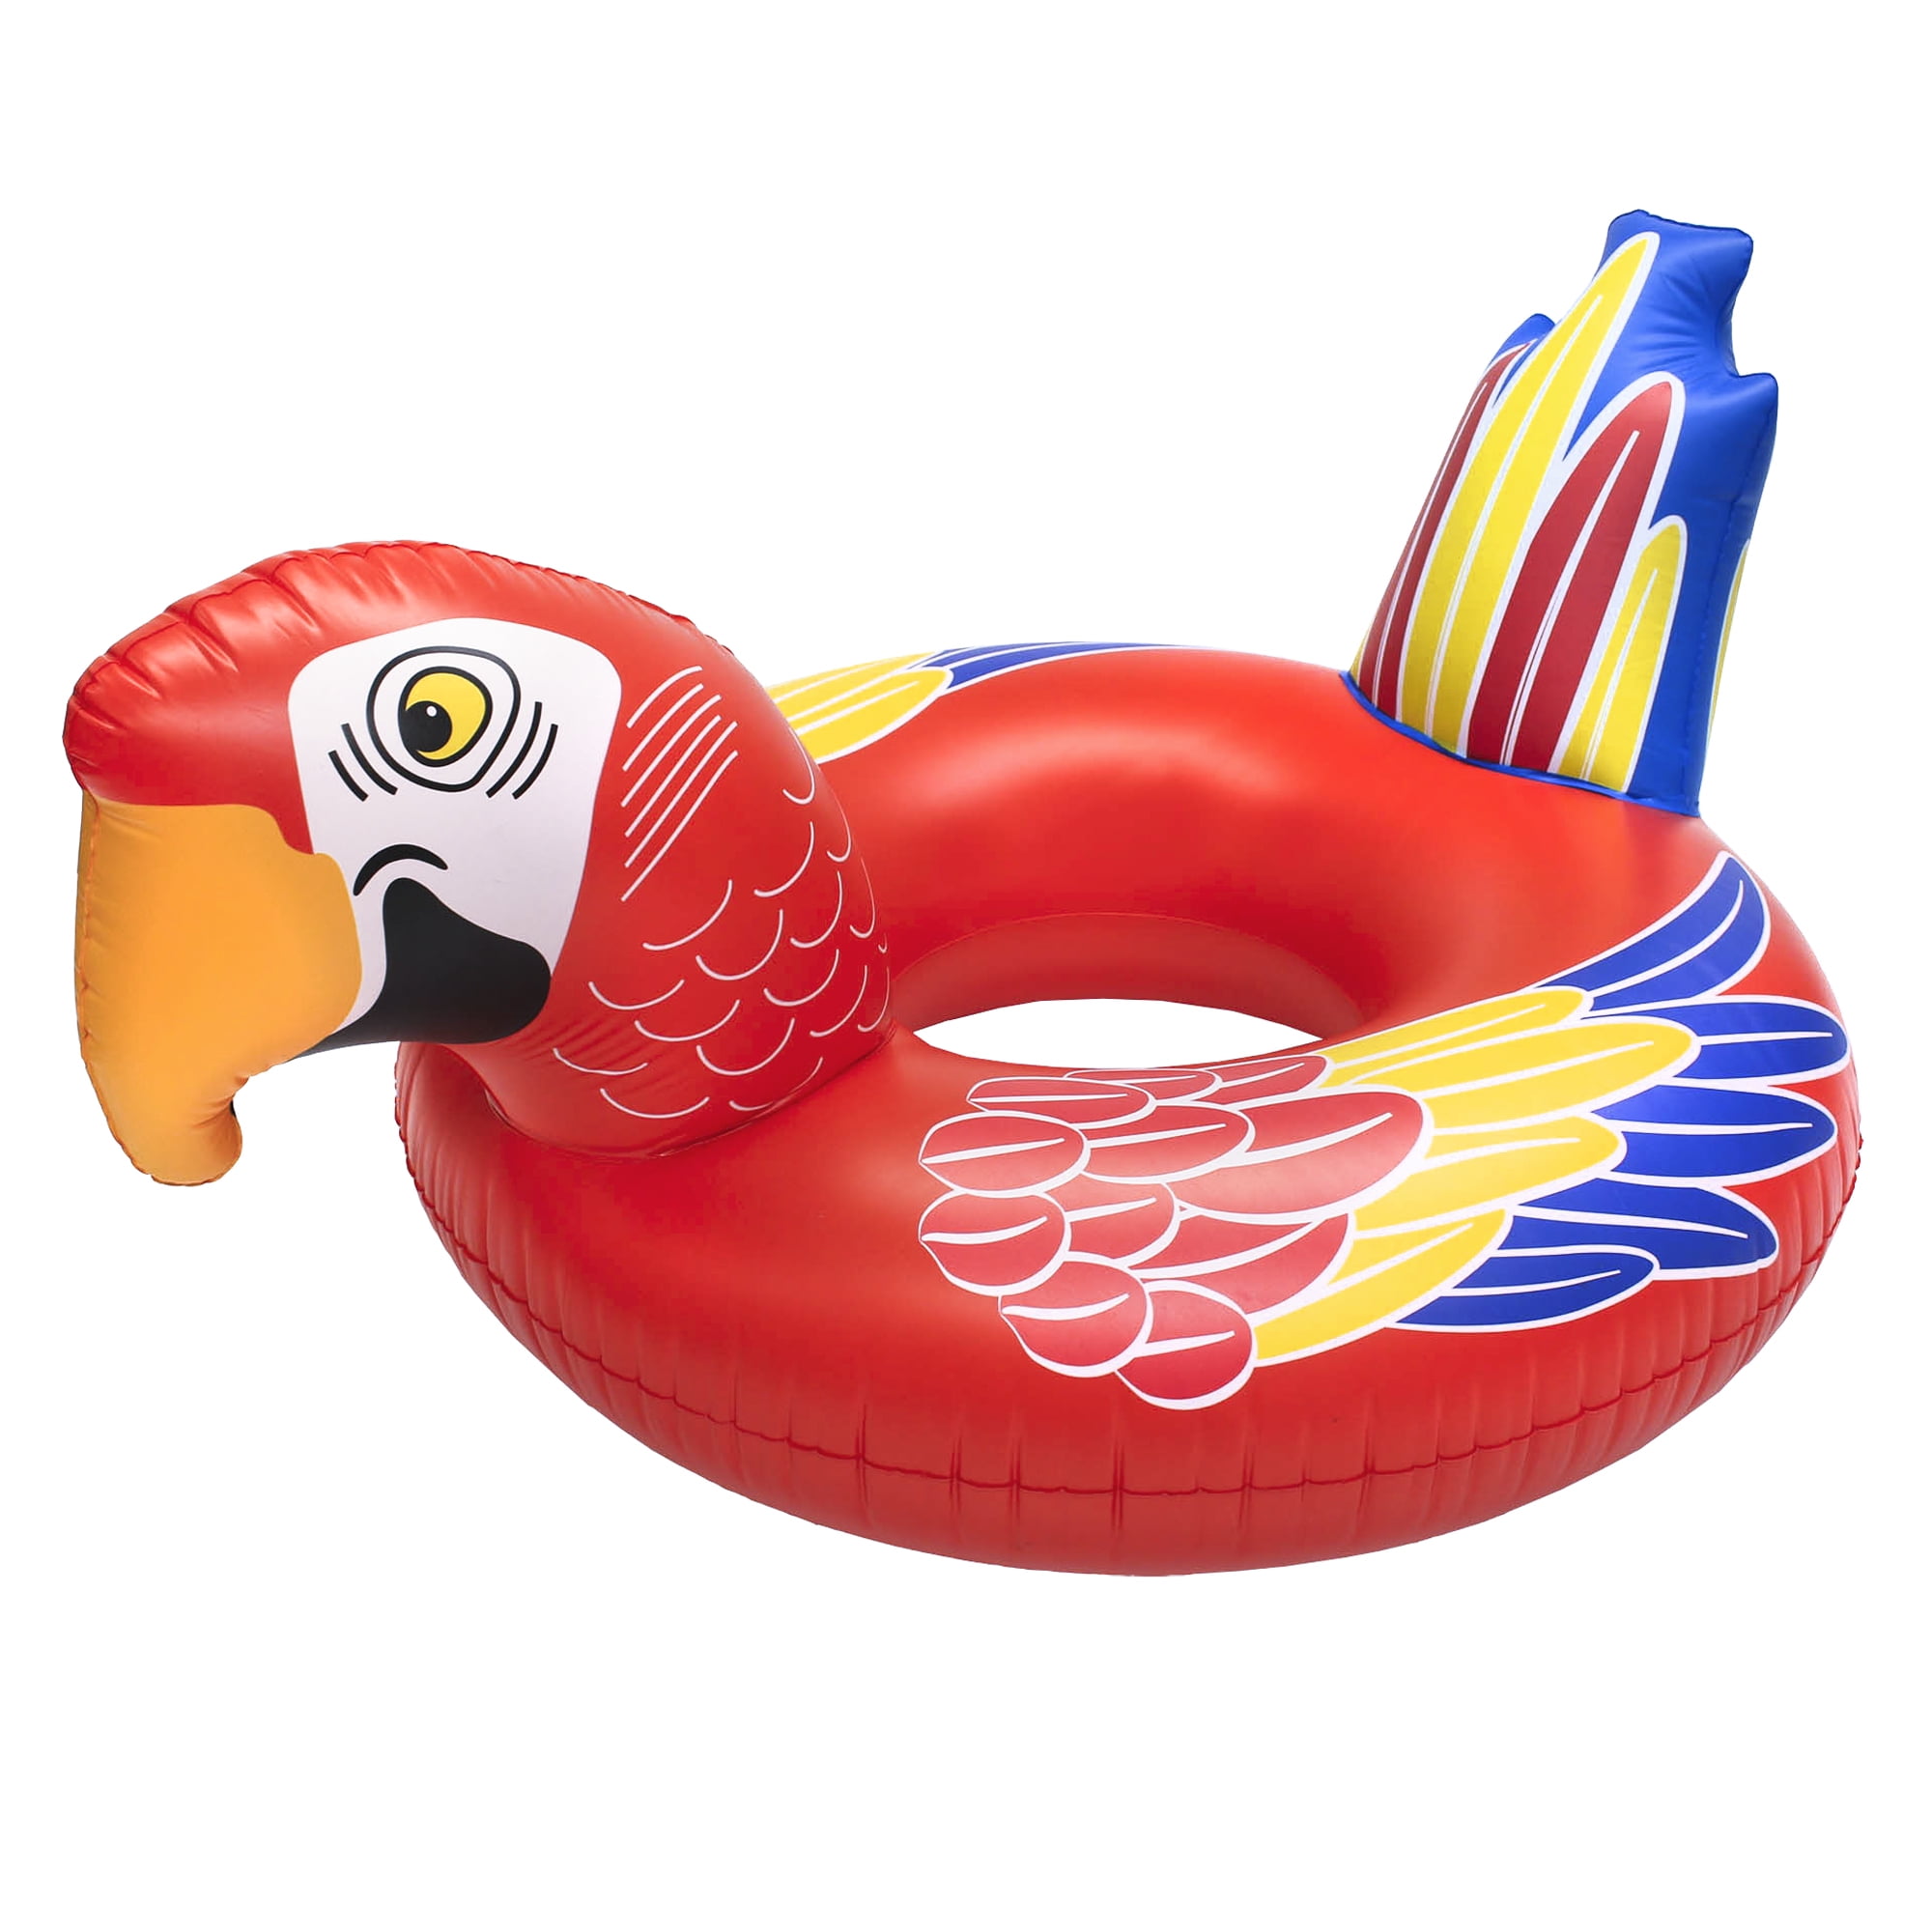 Perfect for a tropical party GoFloats Parrot Party Tube Inflatable Pool Float 